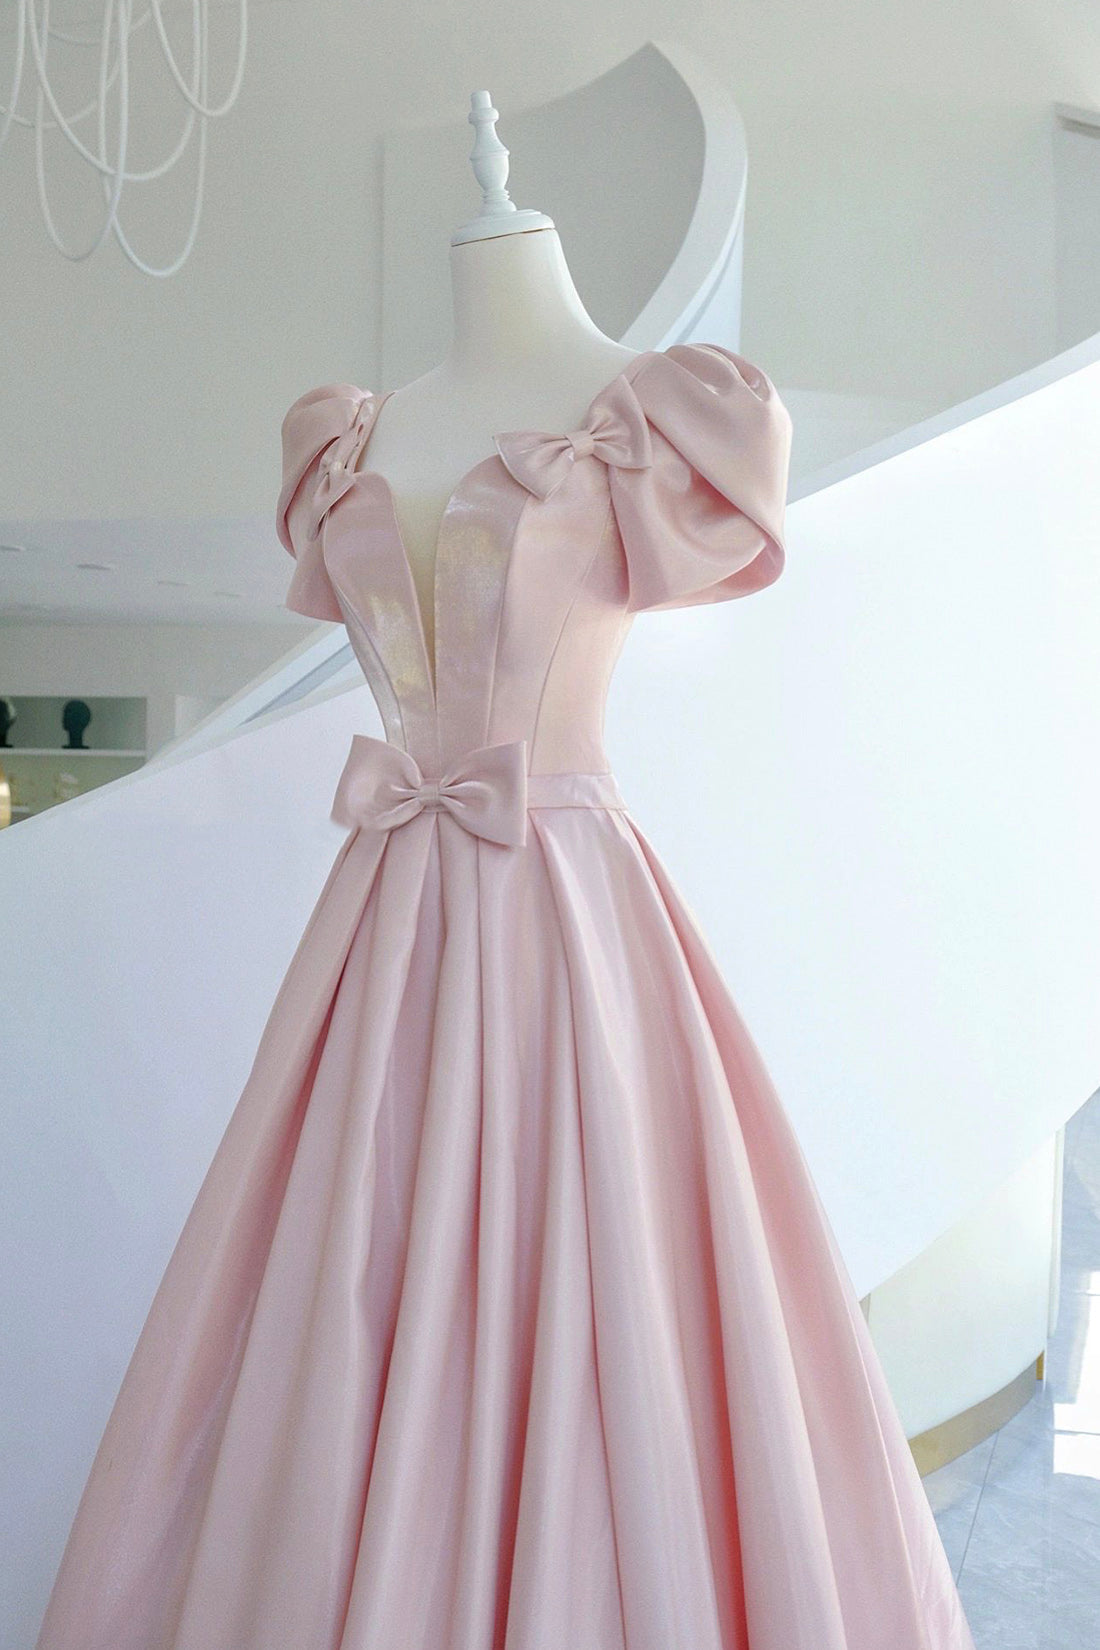 Party Dress Code Man, Pink Satin Long Prom Dress, A-Line Evening Dress with Bow